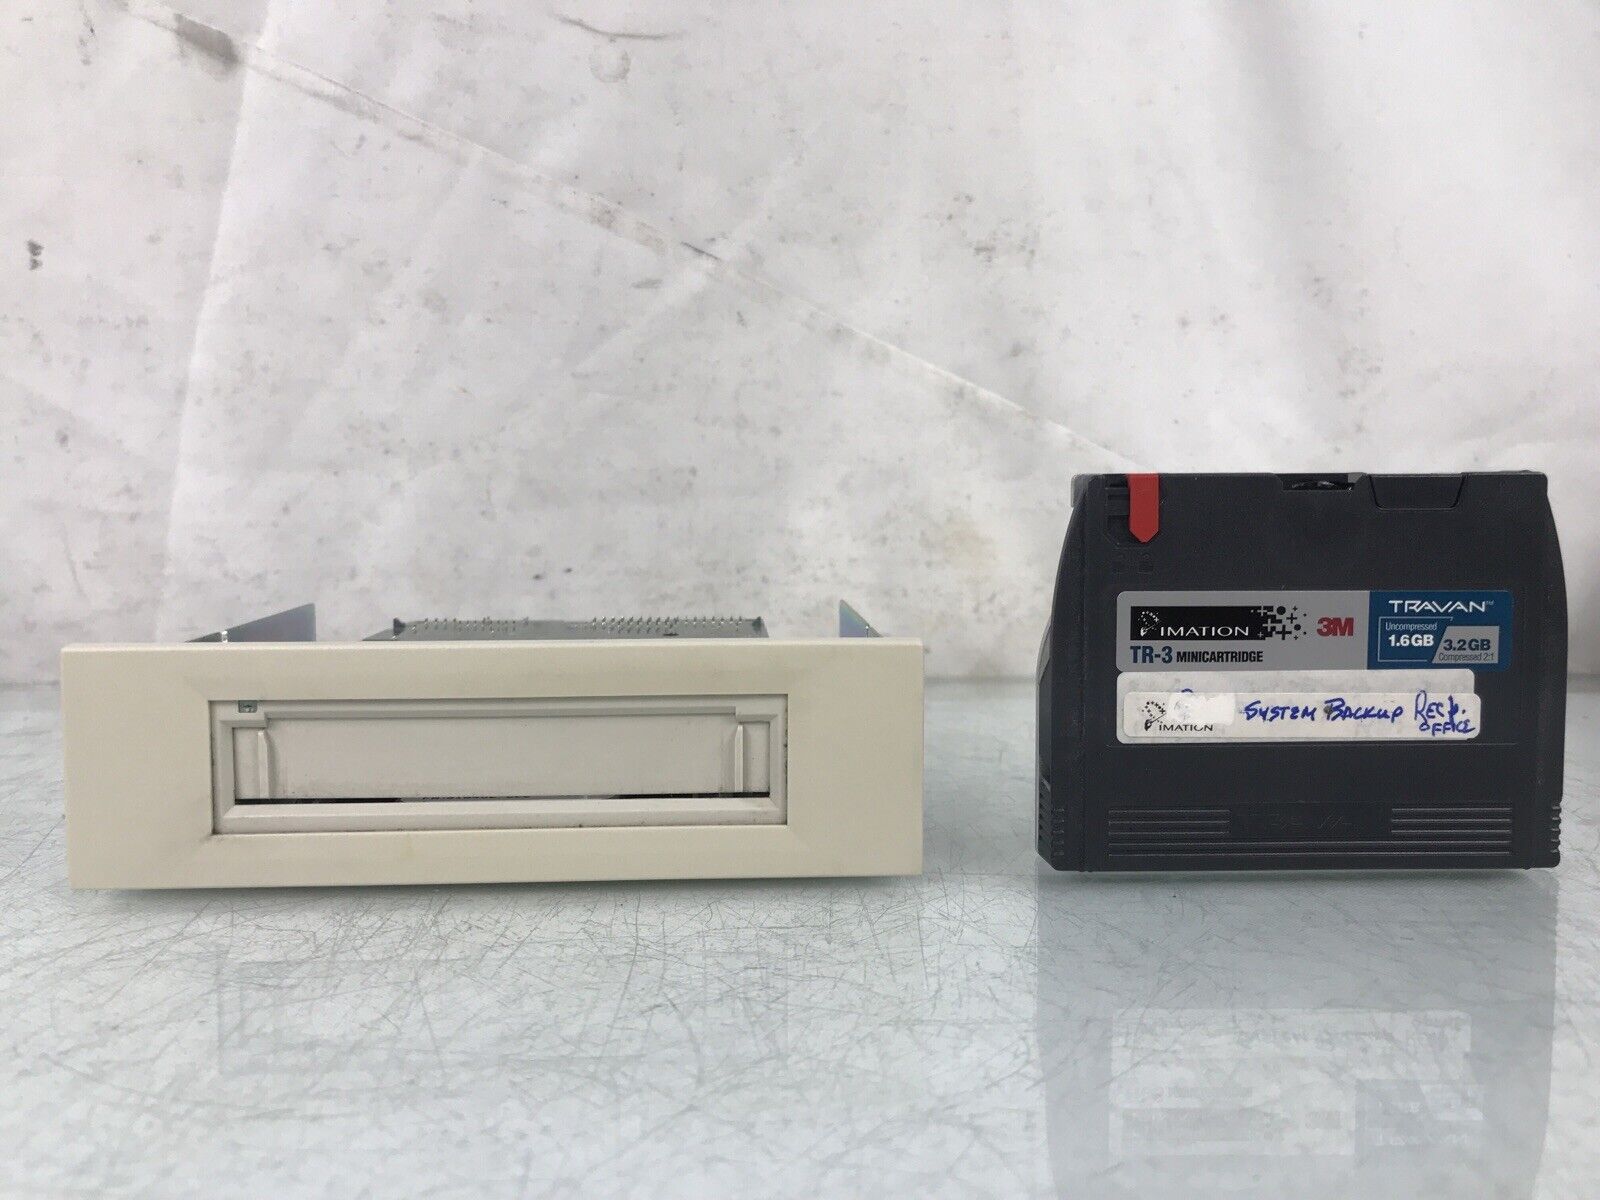 Exabyte Eagle TR-3 Floppy Interface Internal tape backup Internal With 1.6GB